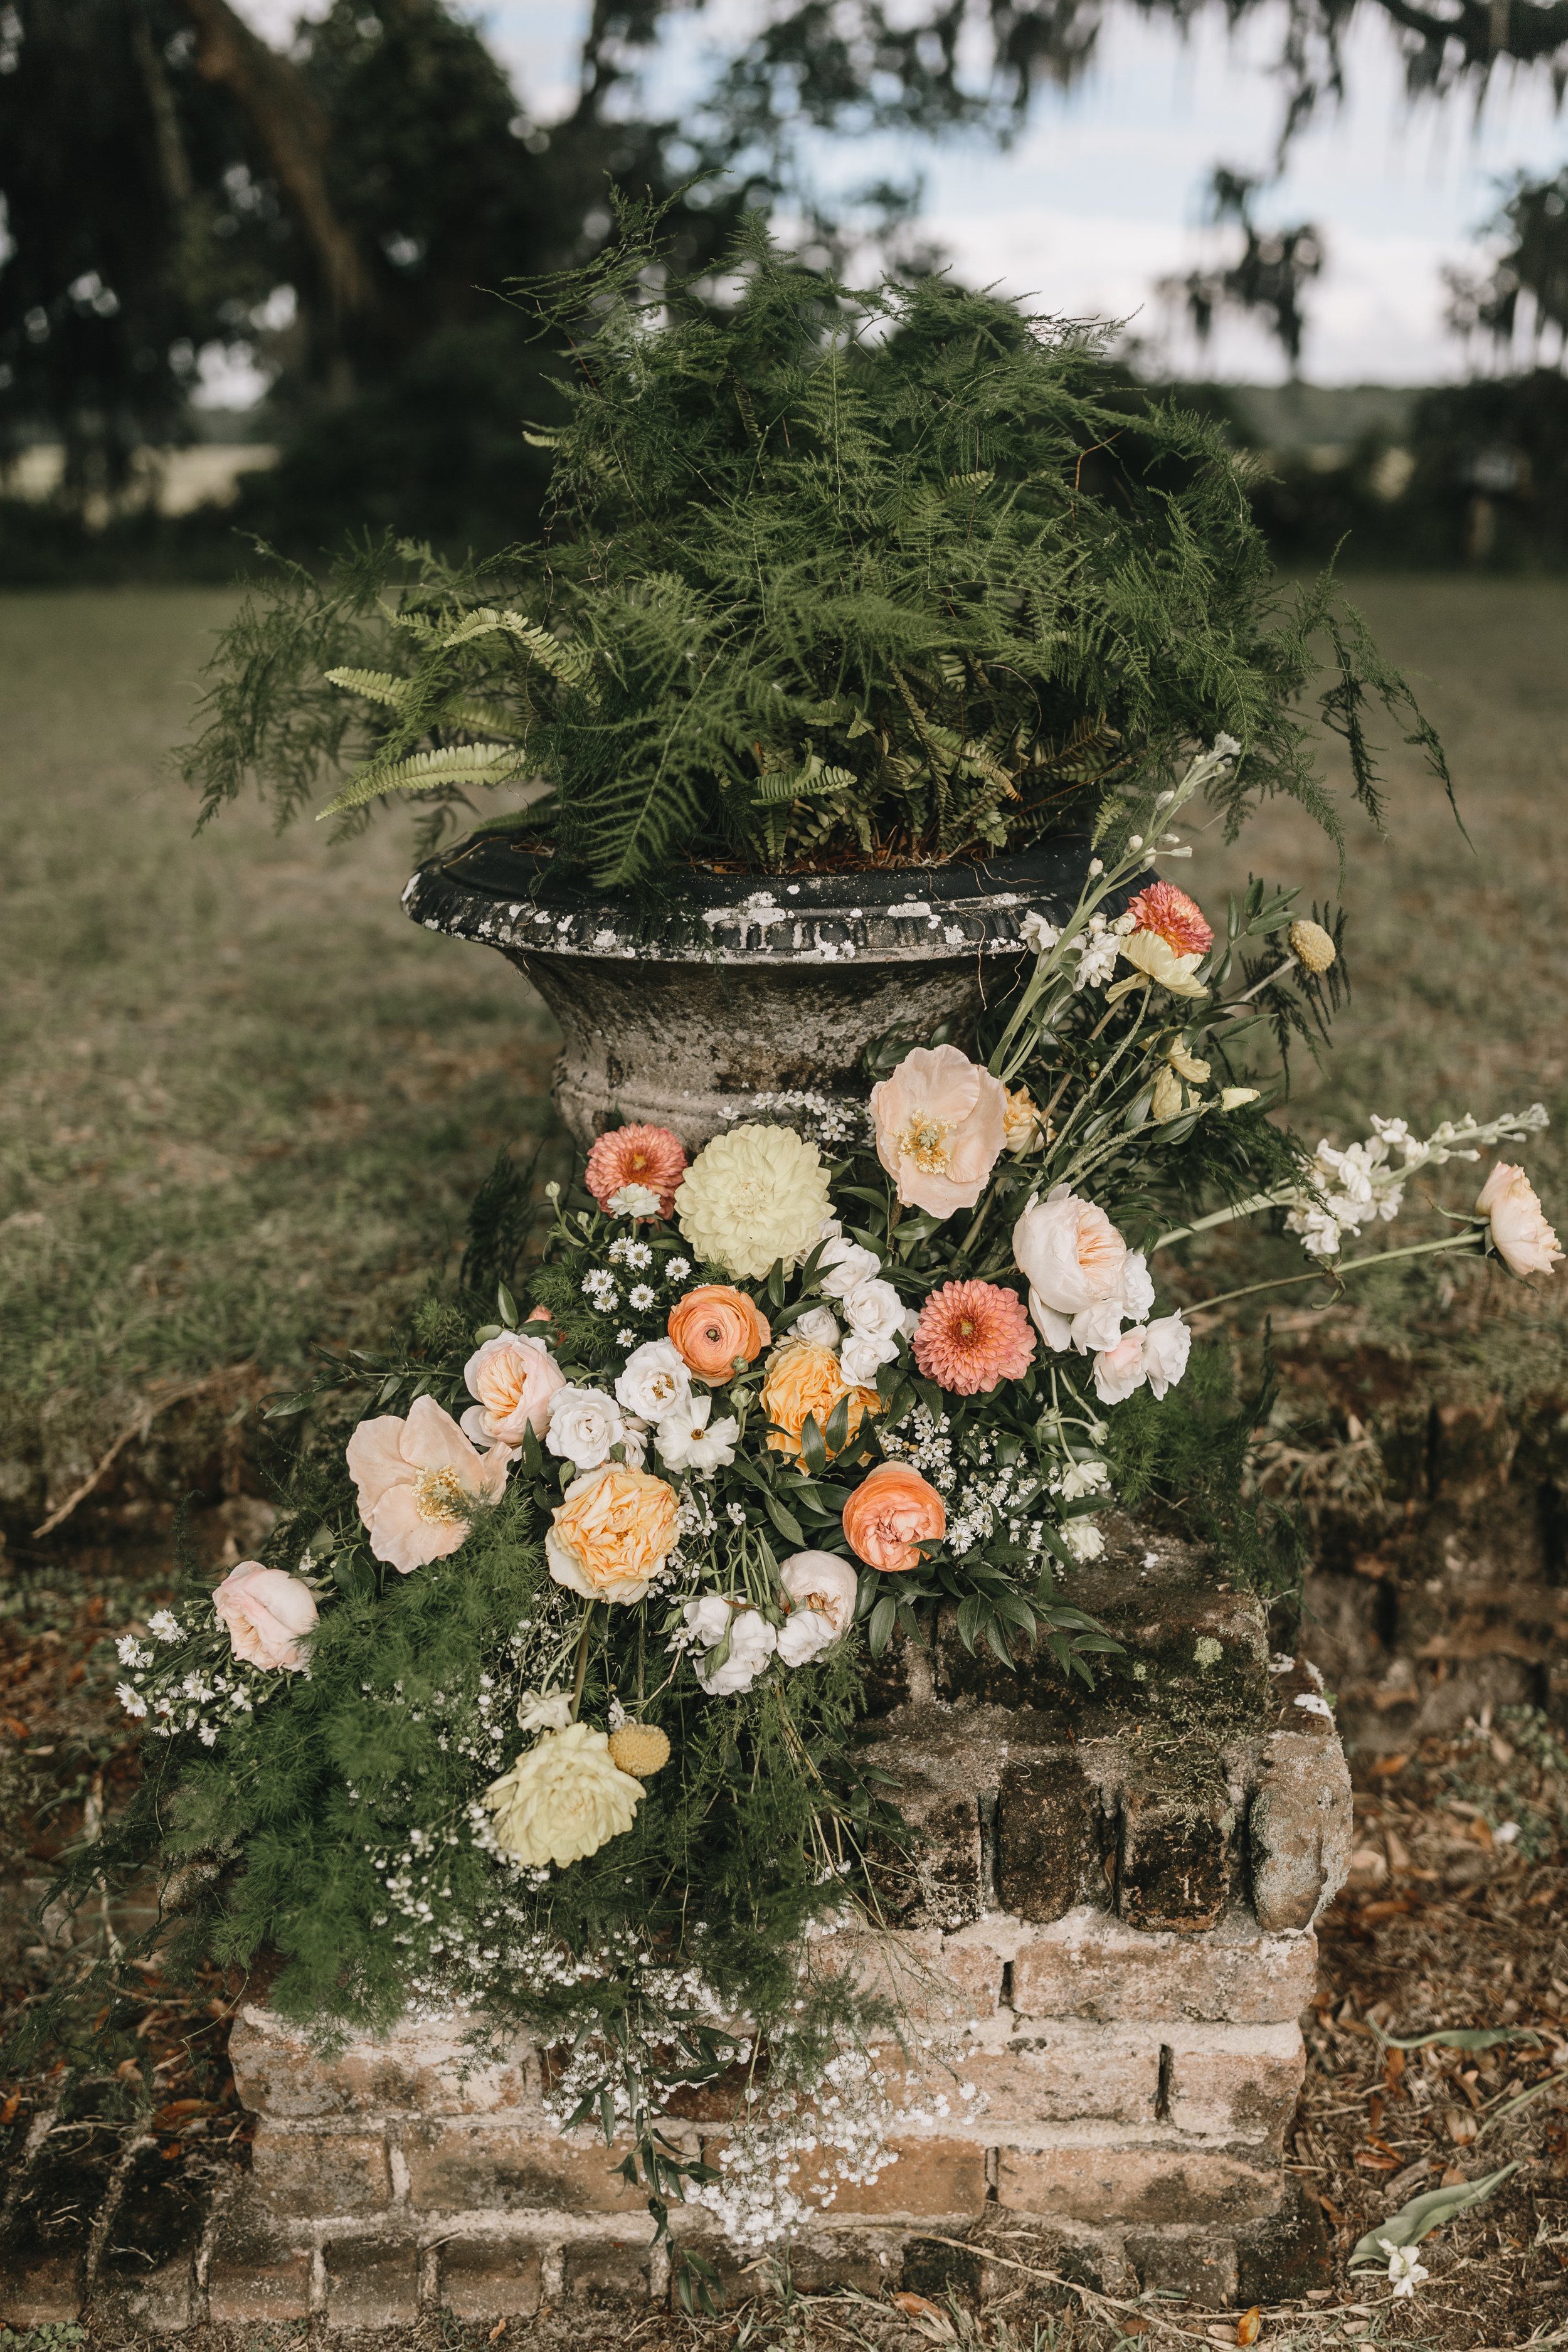 ivory-and-beau-wedding-and-florals-southern-wedding-savannah-florist-savannah-wedding-savannah-wedding-planner-the-wyld-dock-bar-historic-savannah-georgia-wedding-flowers-wedding-blog-wedding-inspiration-LAUREN+NICK_WEDDING-427.jpg